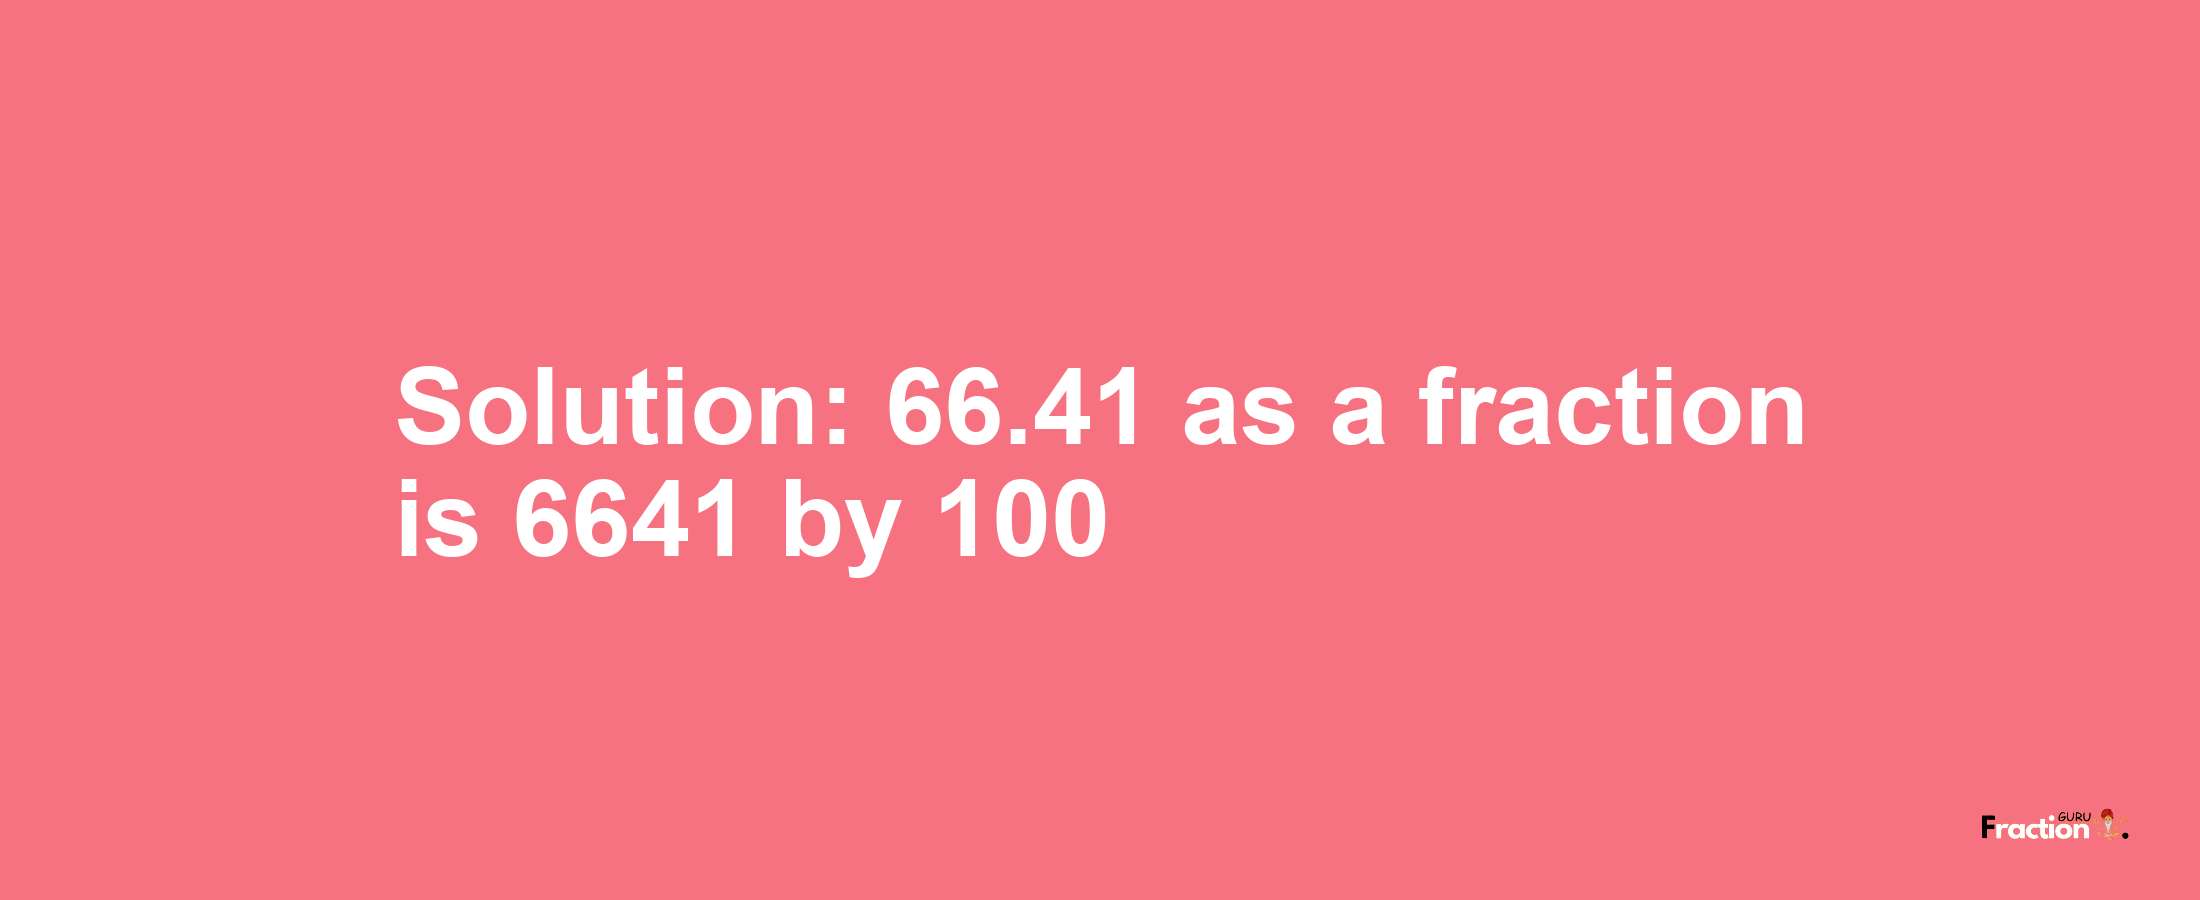 Solution:66.41 as a fraction is 6641/100